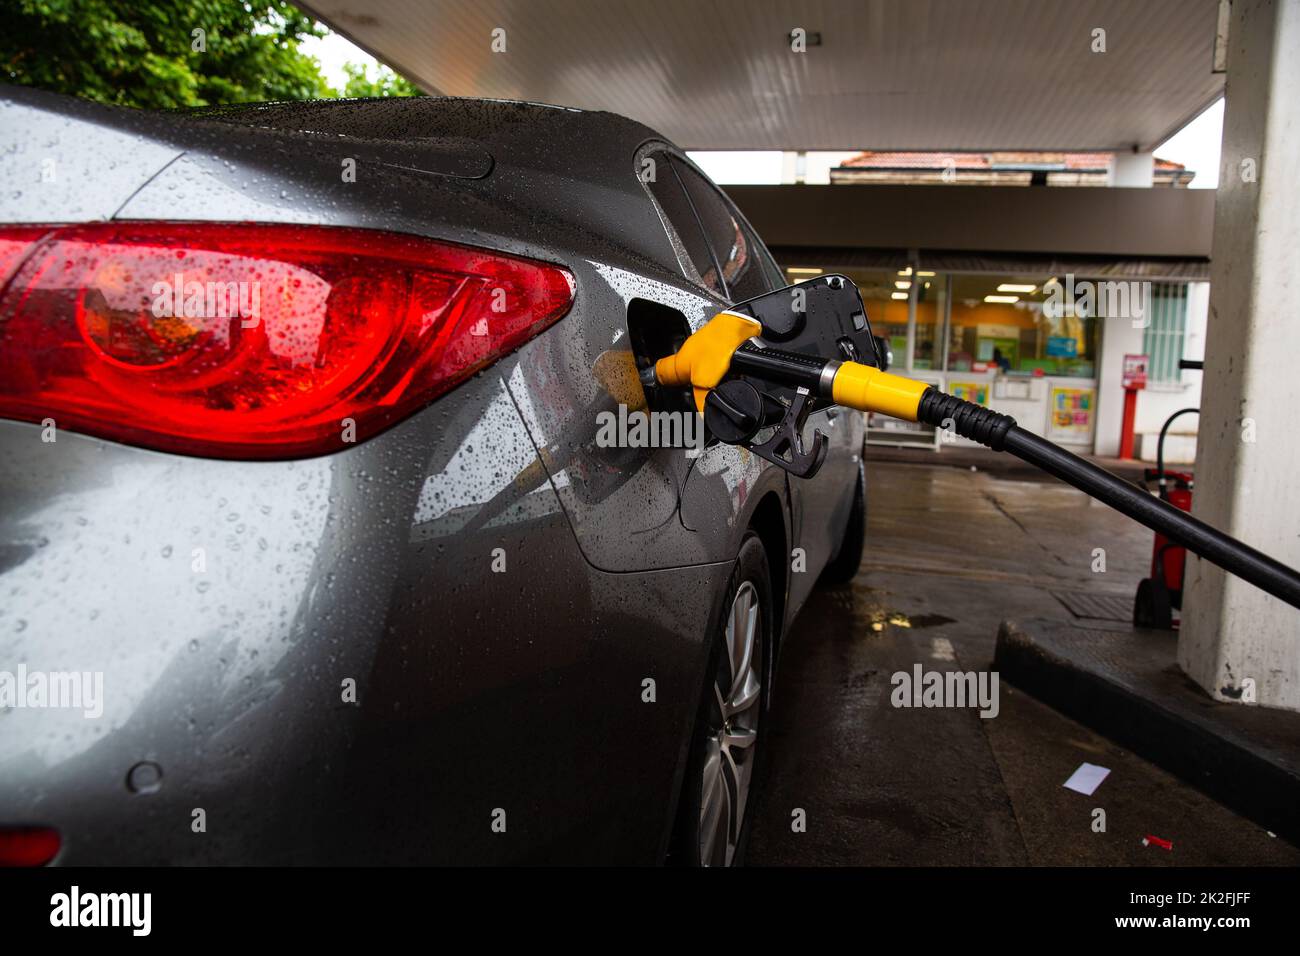 The car is refueling at the gas station. Refueling automobile with gasoline or diesel with a fuel dispenser. Stock Photo